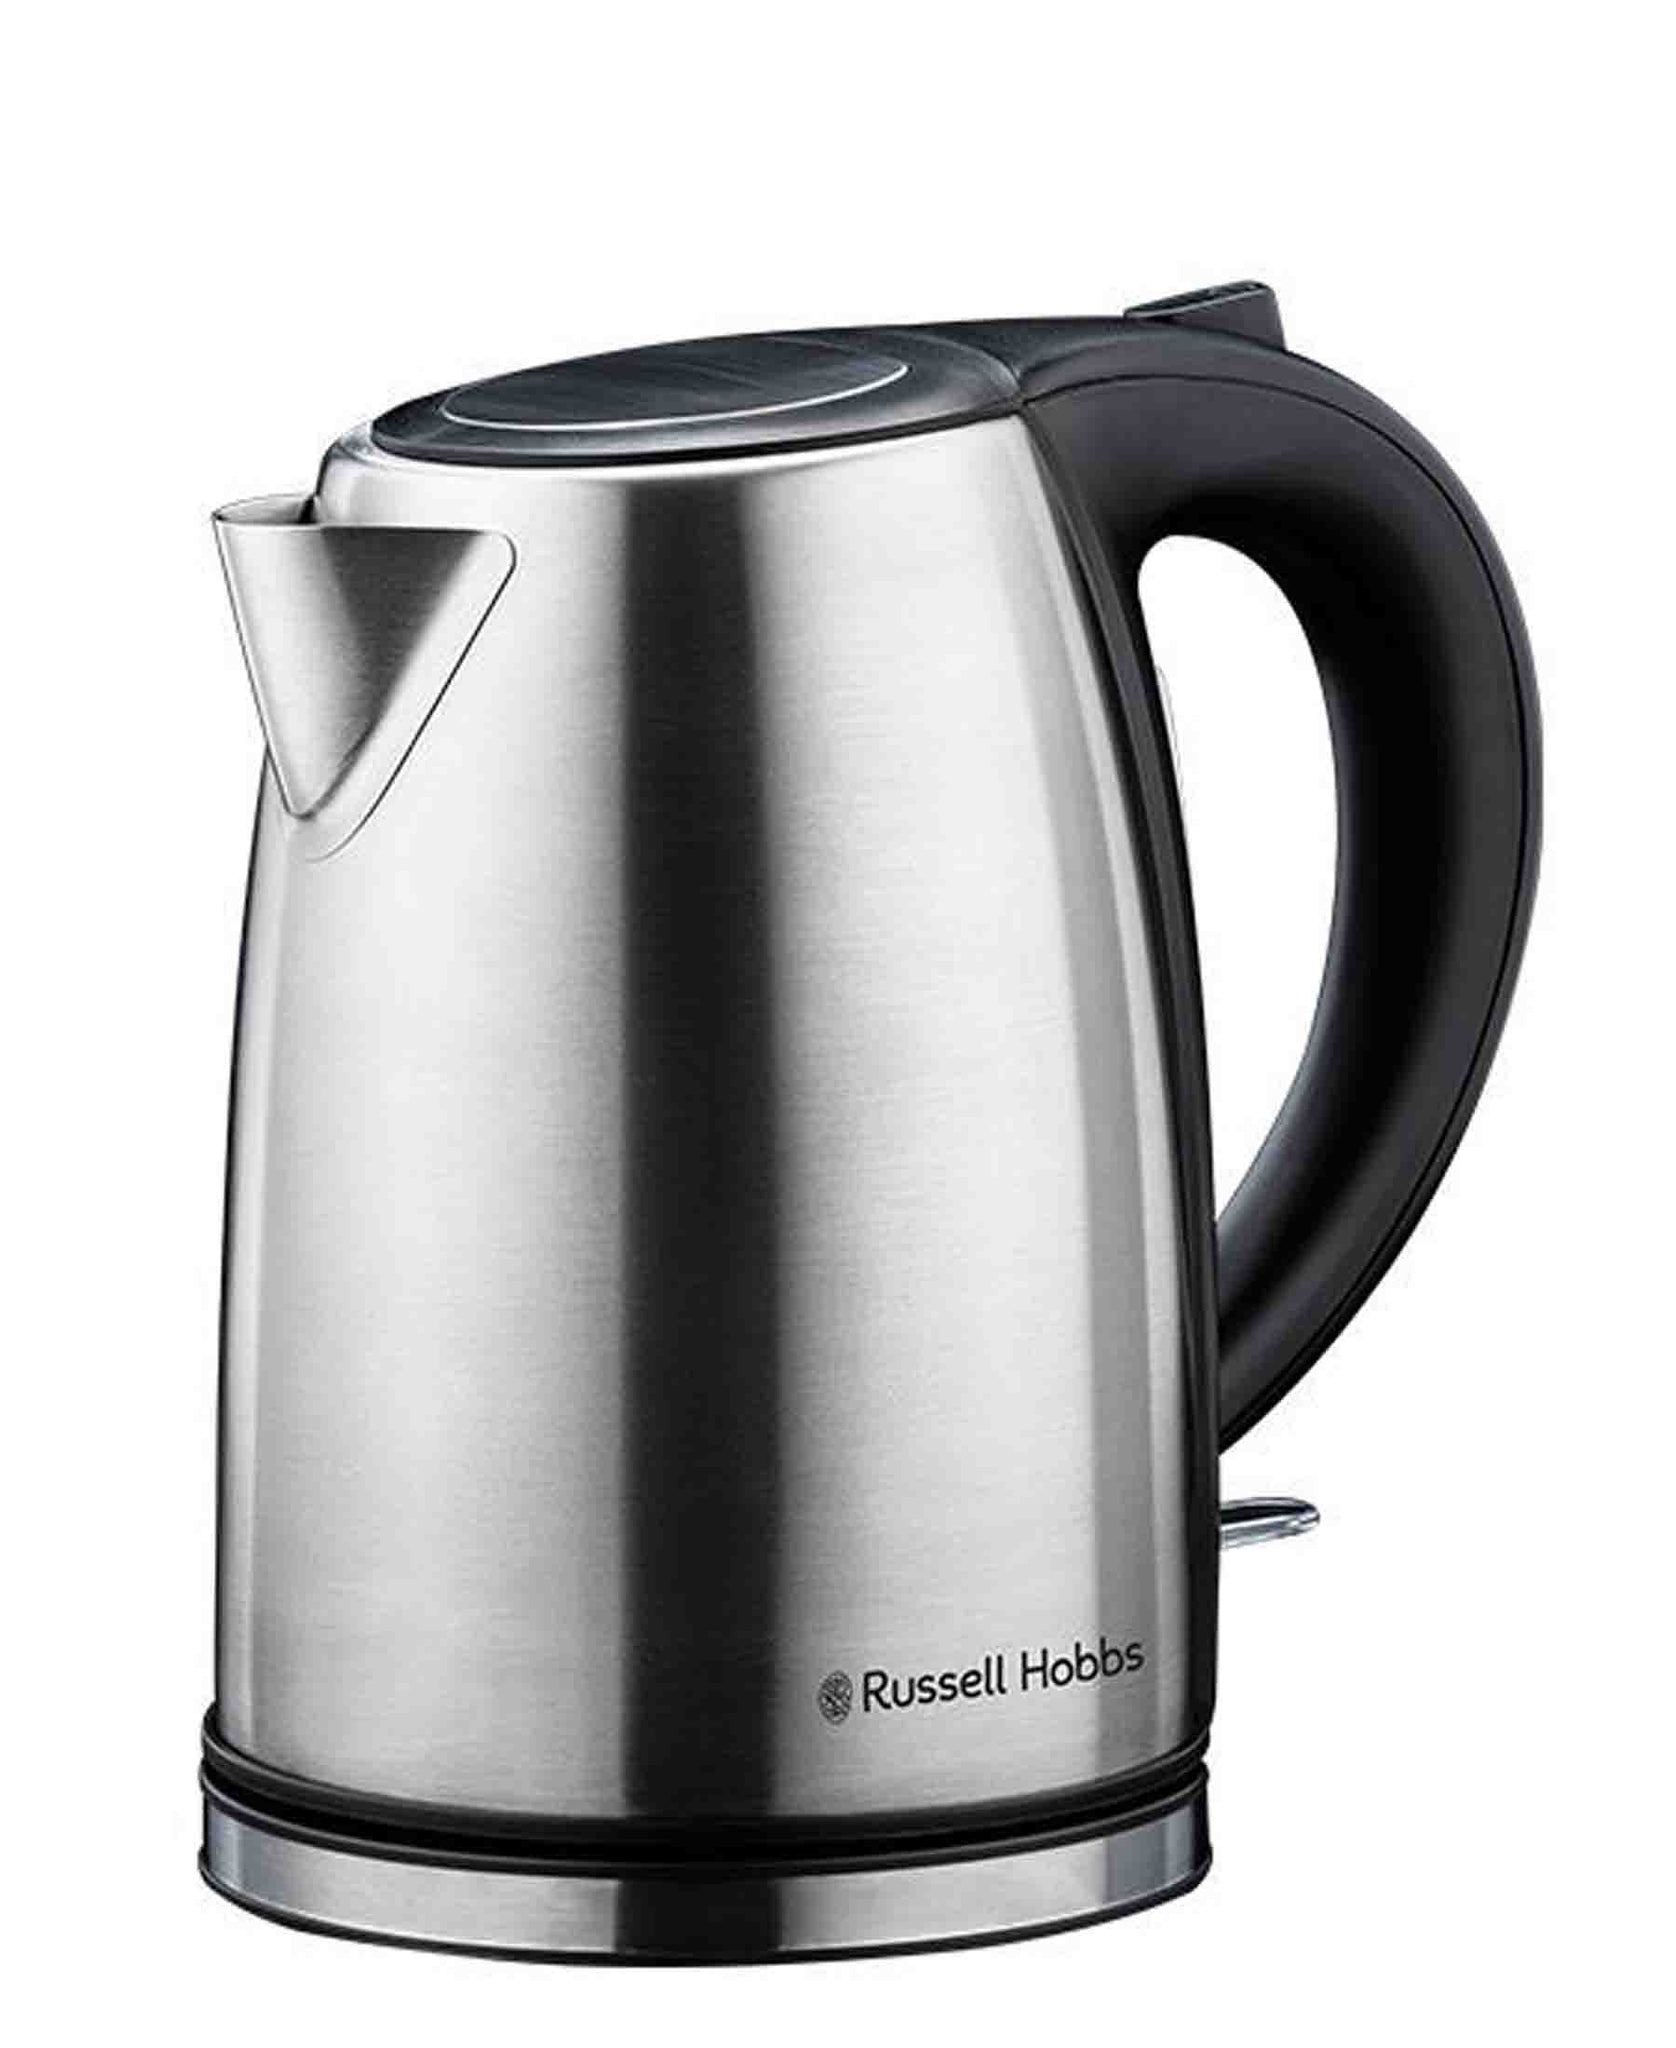 Russell Hobbs 1.7 Litre Stainless Steel Kettle - Silver